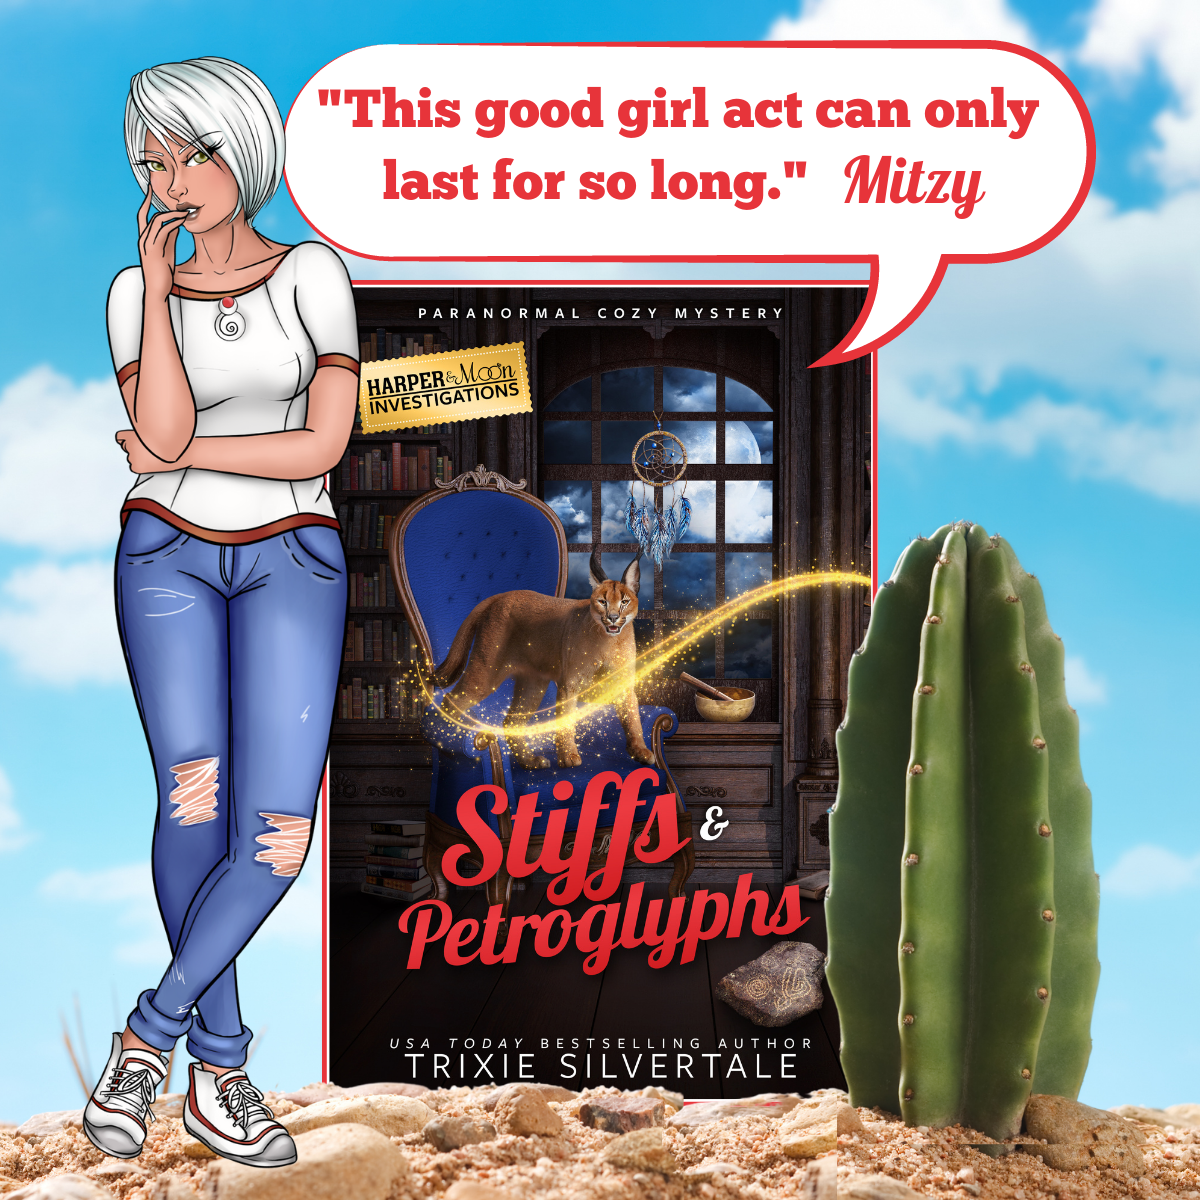 Best Amateur Sleuth Mystery! Stiffs and Petroglyphs: Paranormal Cozy Mystery by Trixie Silvertale - ON SALE NOW!